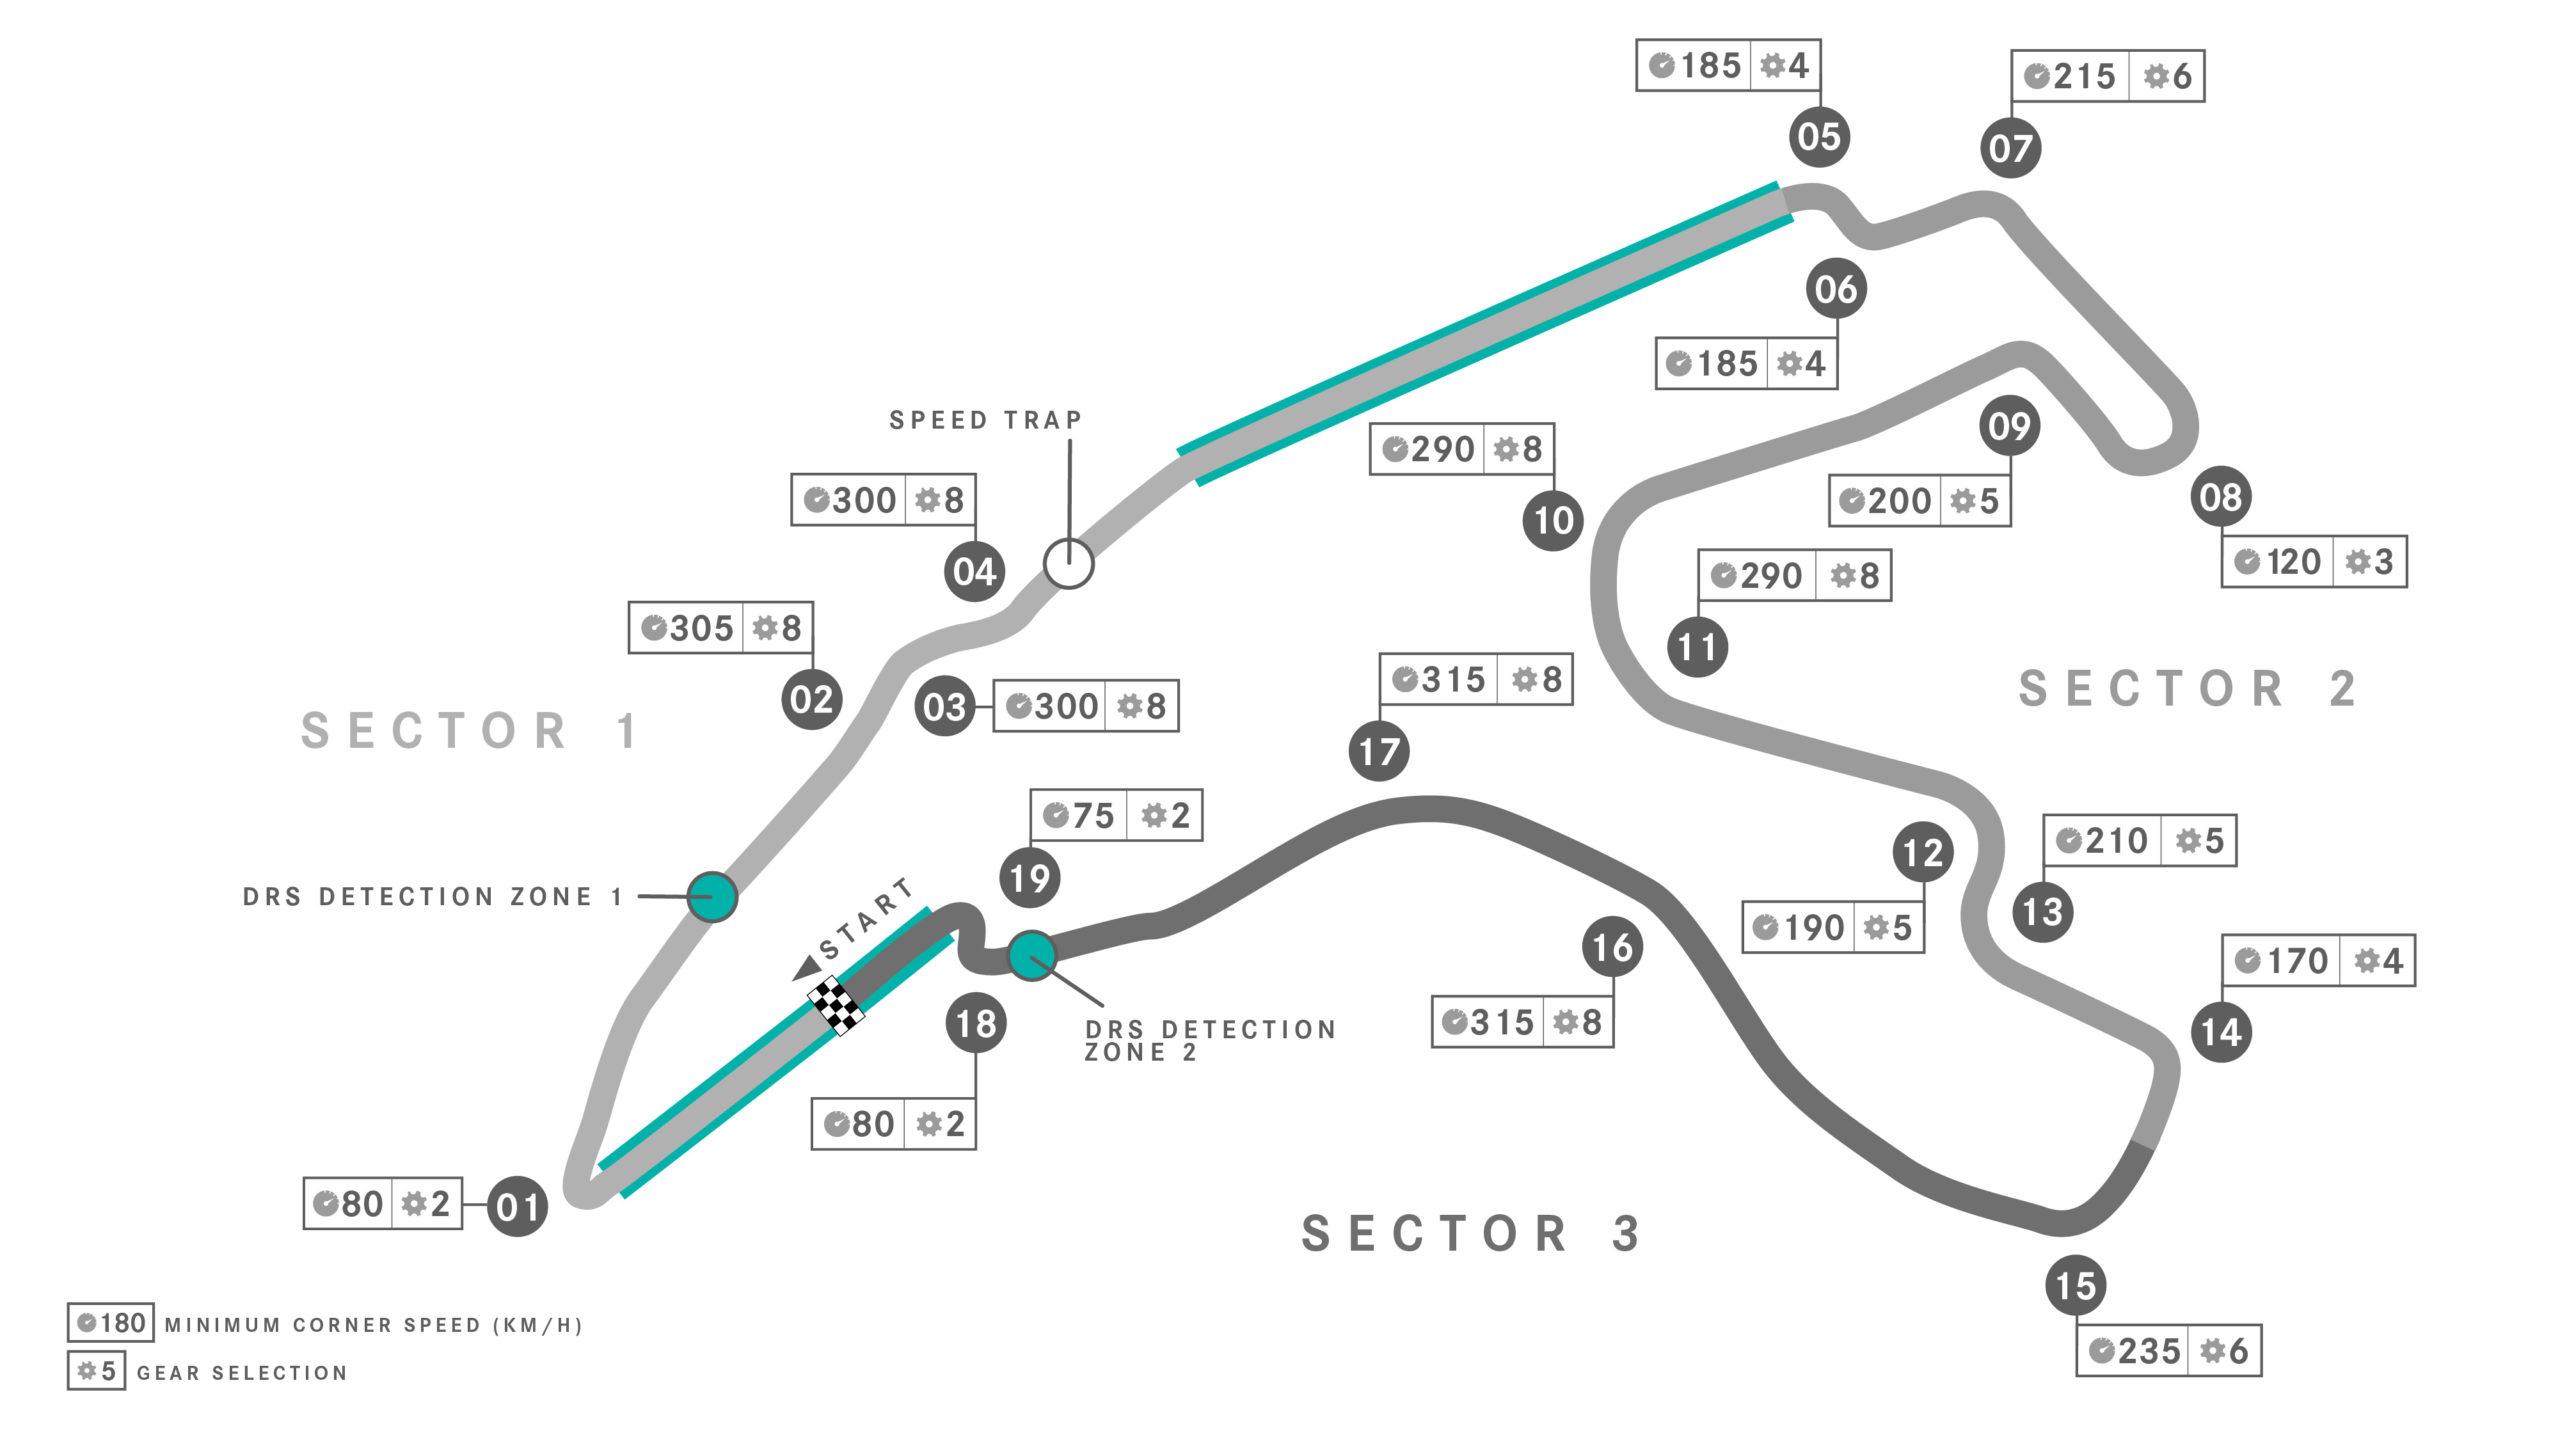 Spa-Francorchamps Circuit Map